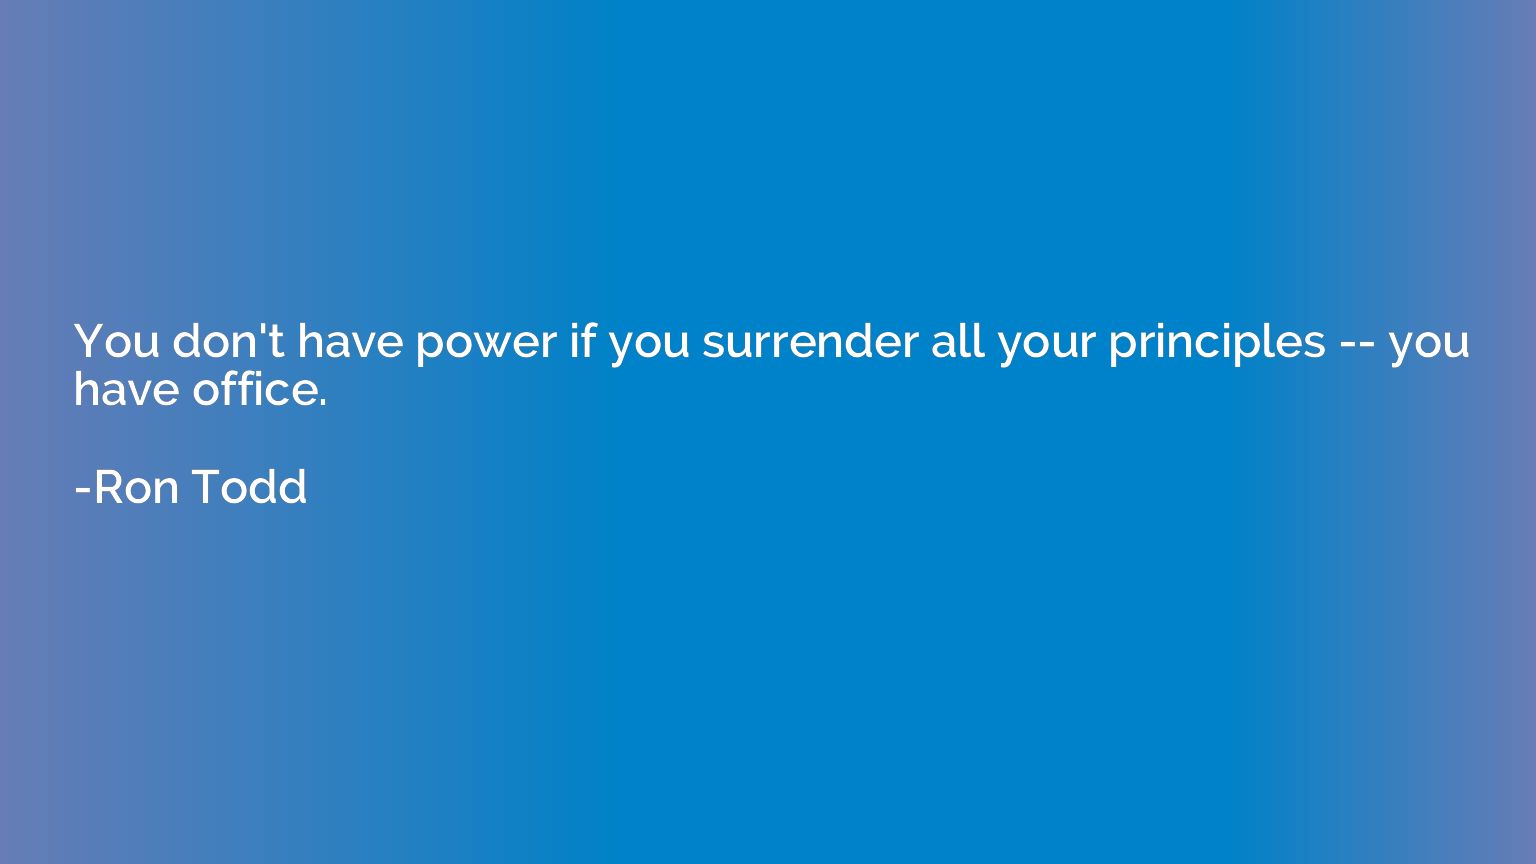 You don't have power if you surrender all your principles --